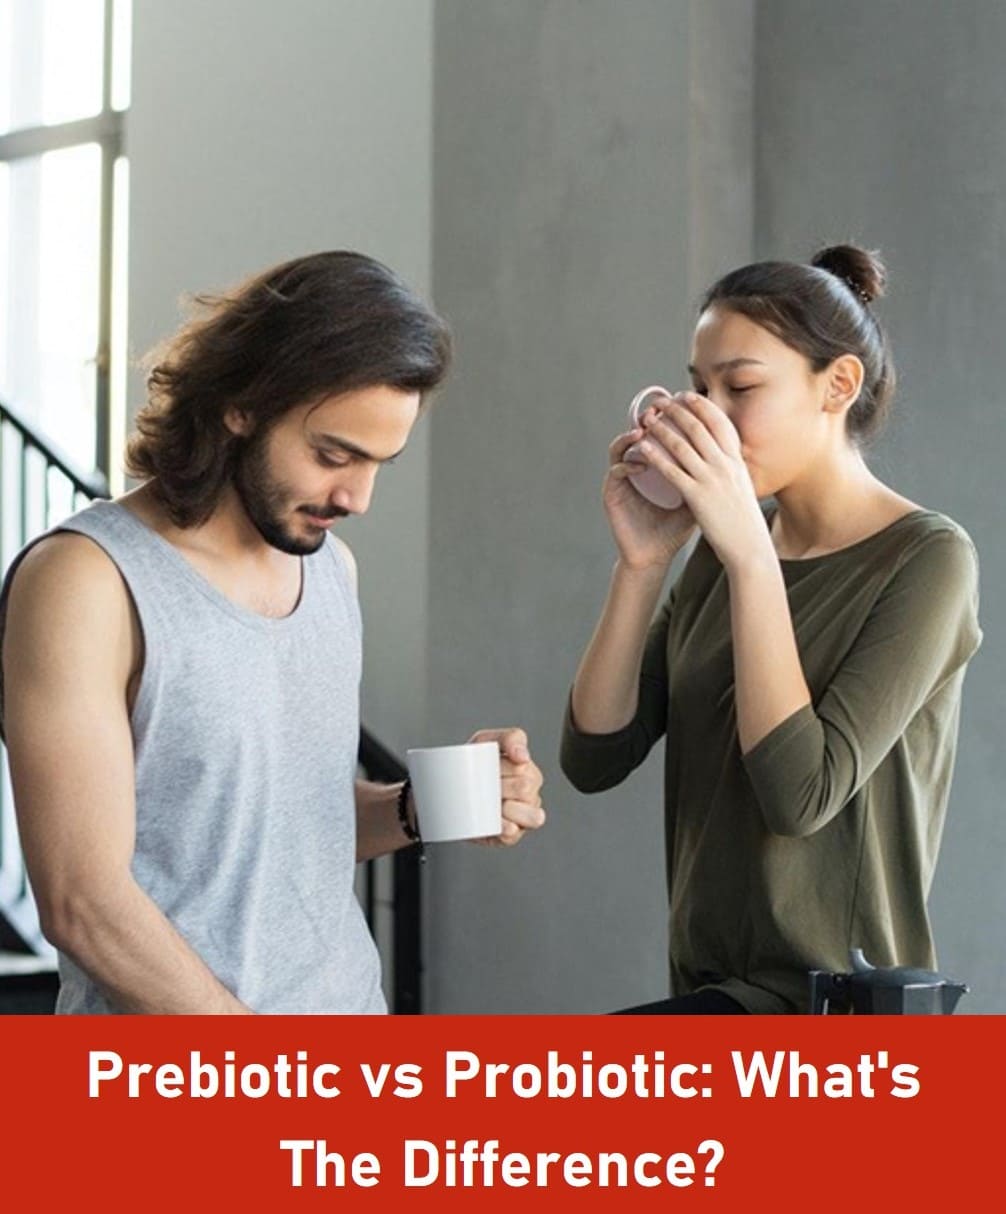 Prebiotic vs Probiotic: What's The Difference?